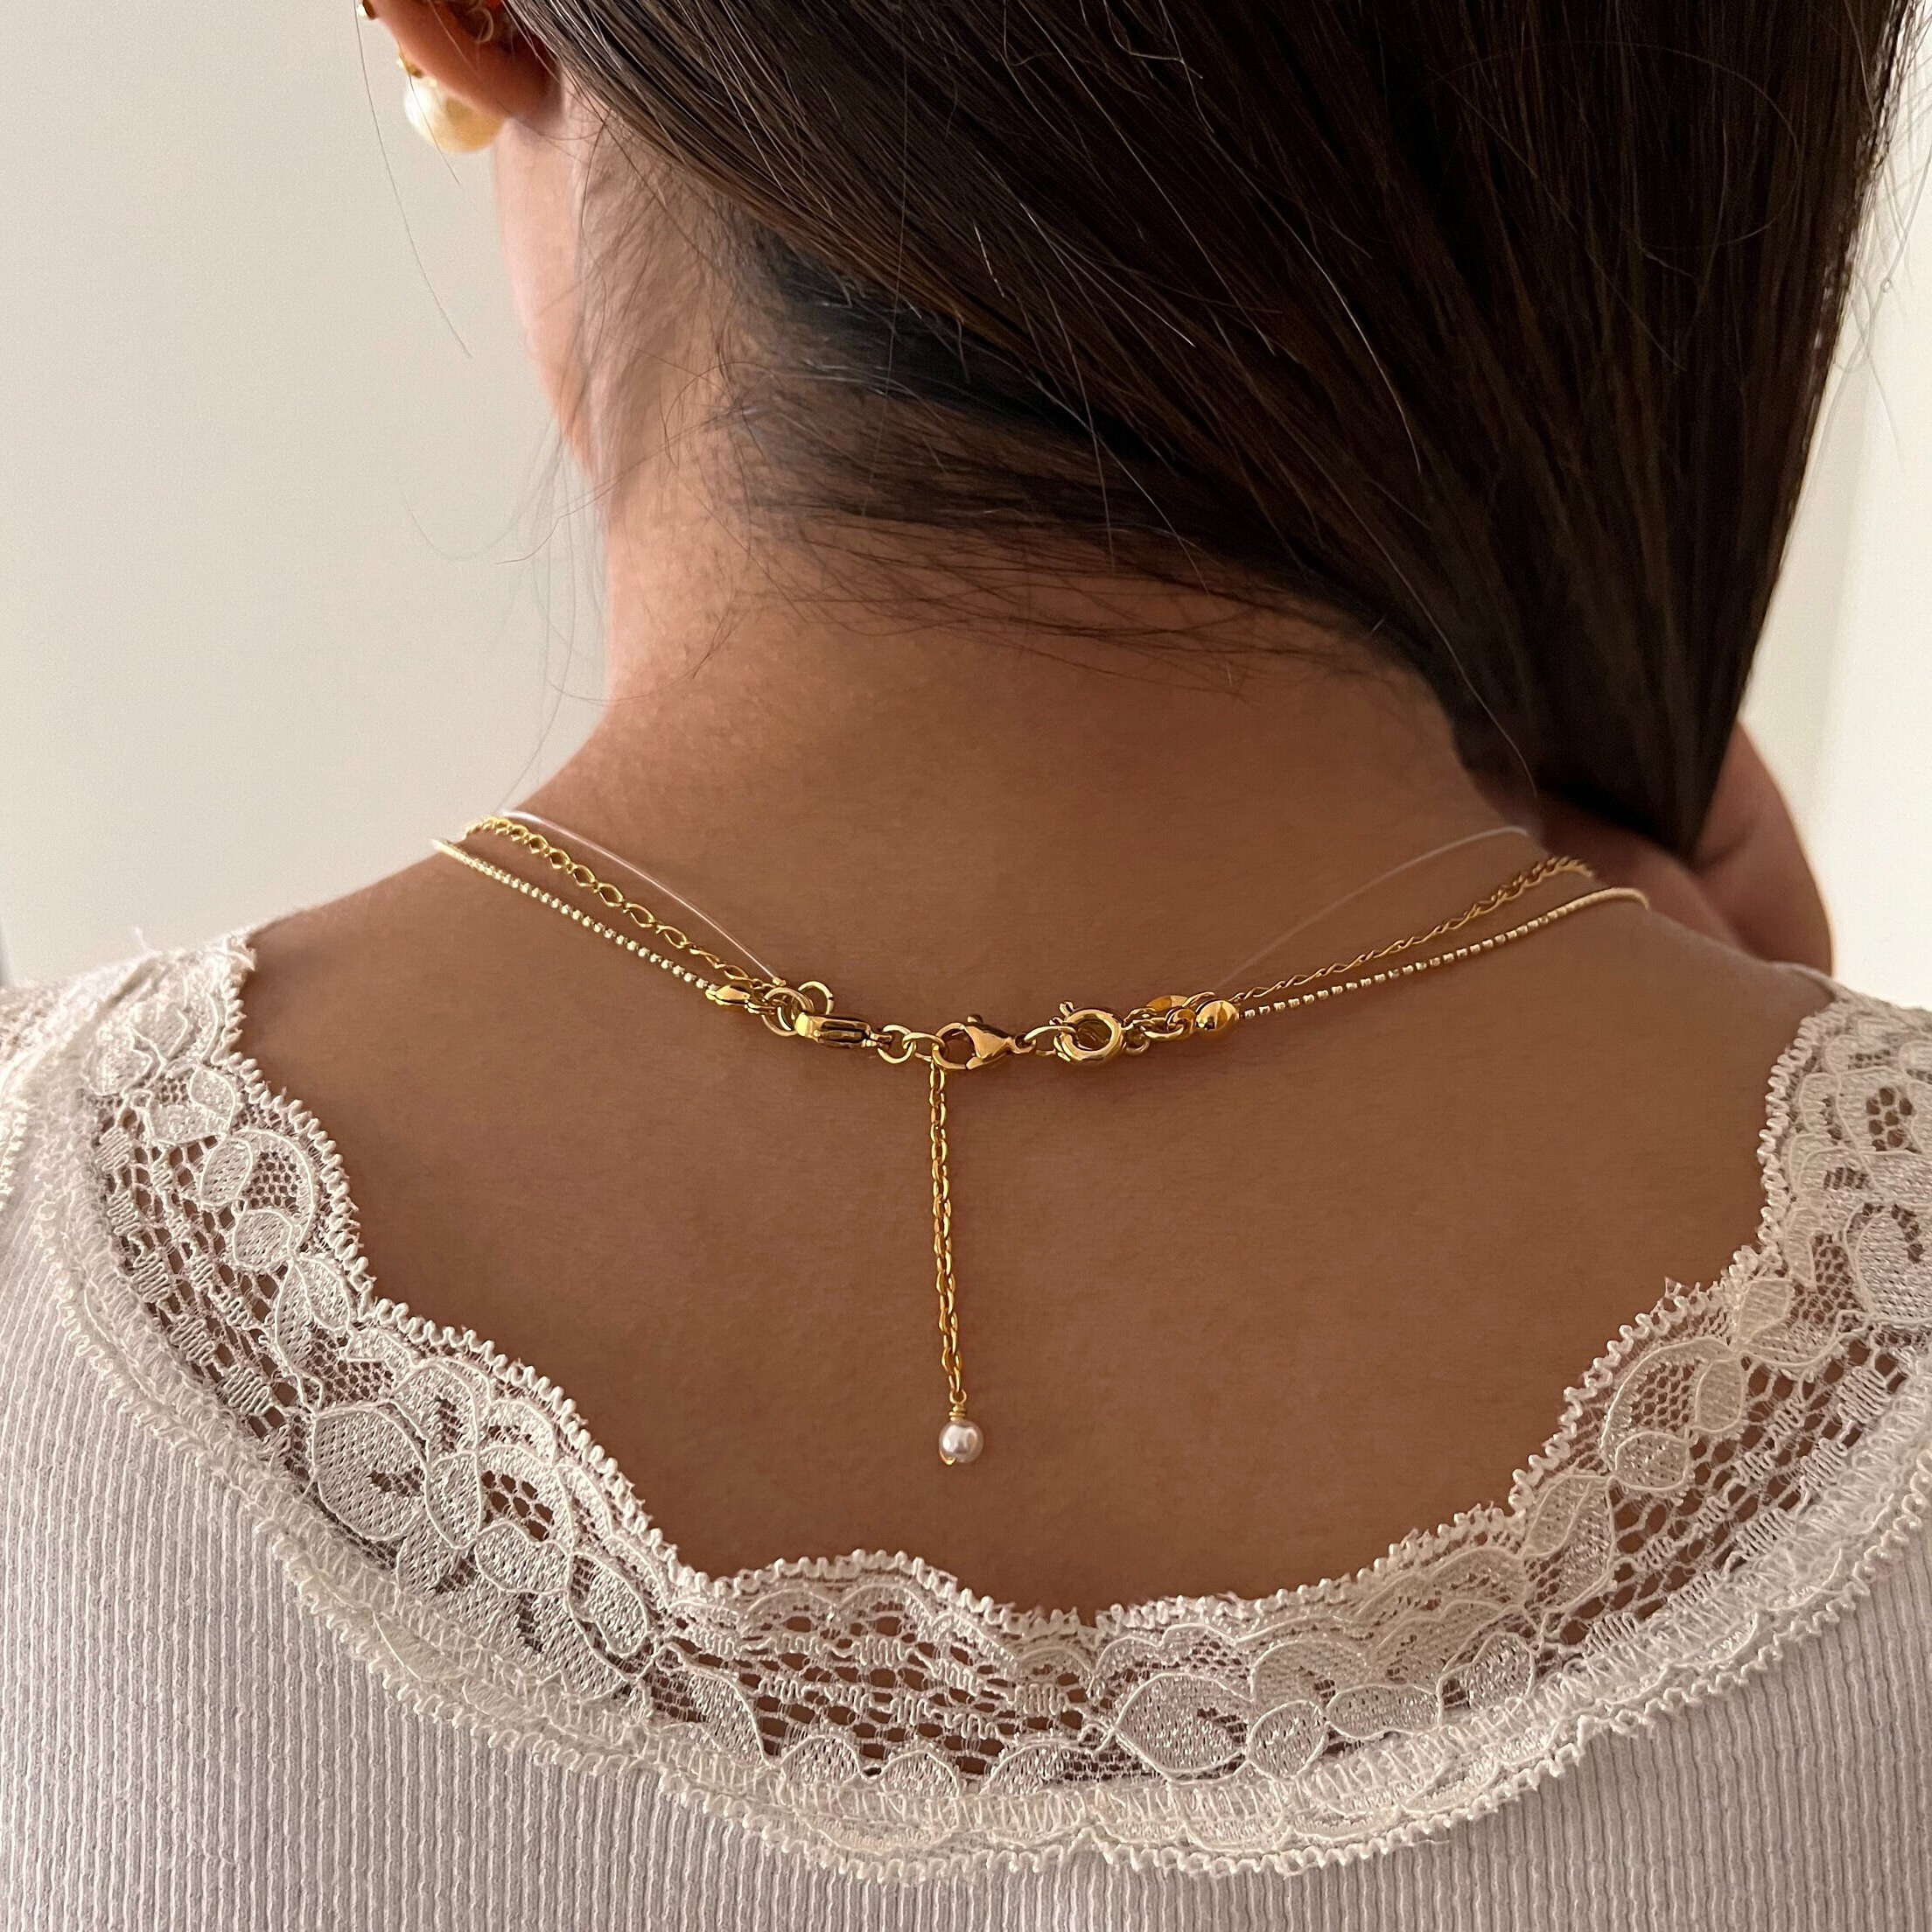  Kcctoo Necklace Connectors for Multiple Necklace Layering  Clasps 18K Gold and Silver Womens Jewelry Separators